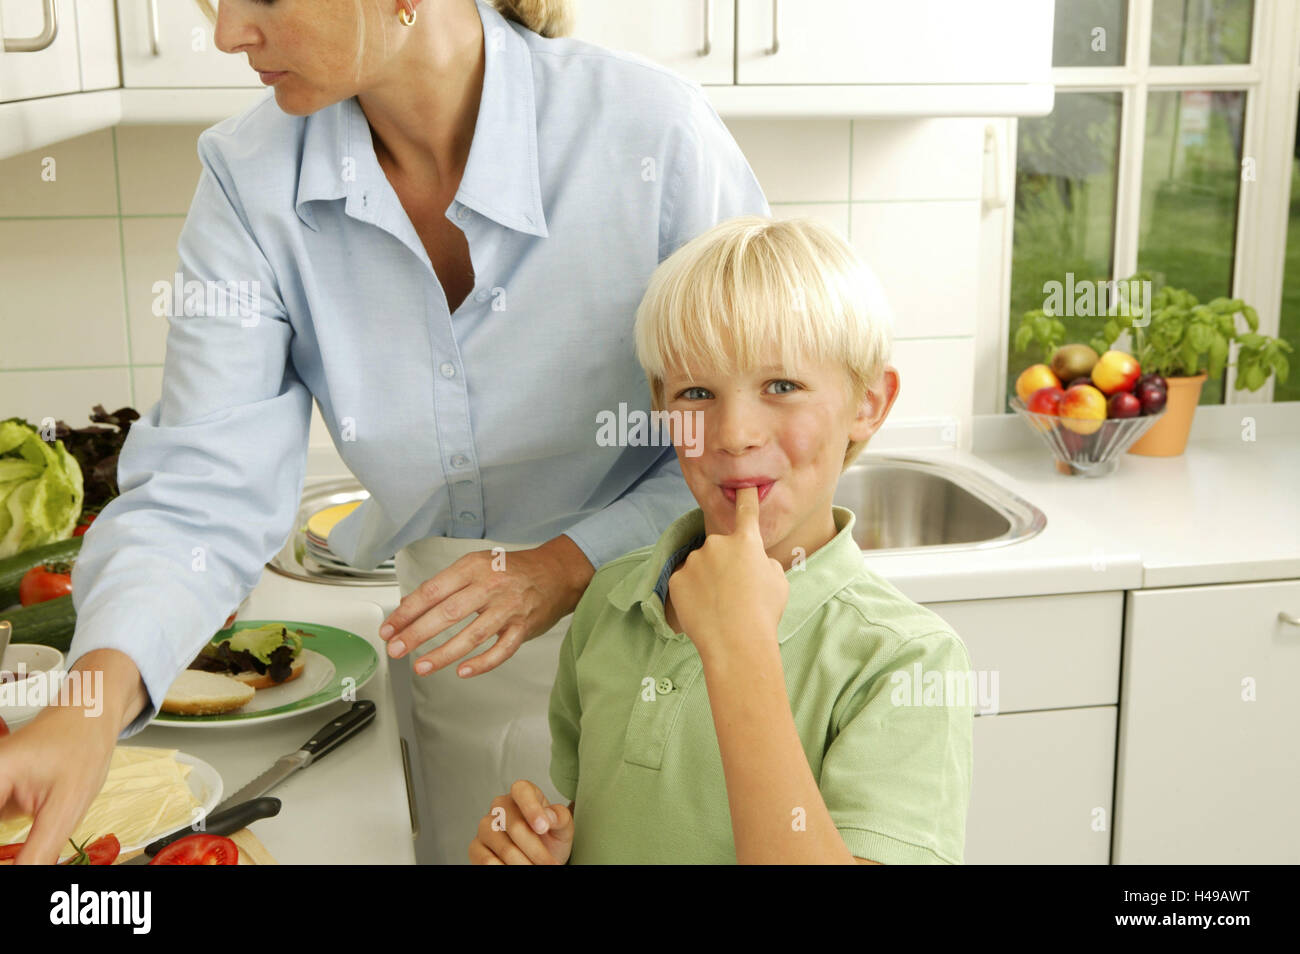 Mother, son, cuisine, focus, cooking, nibble, Stock Photo